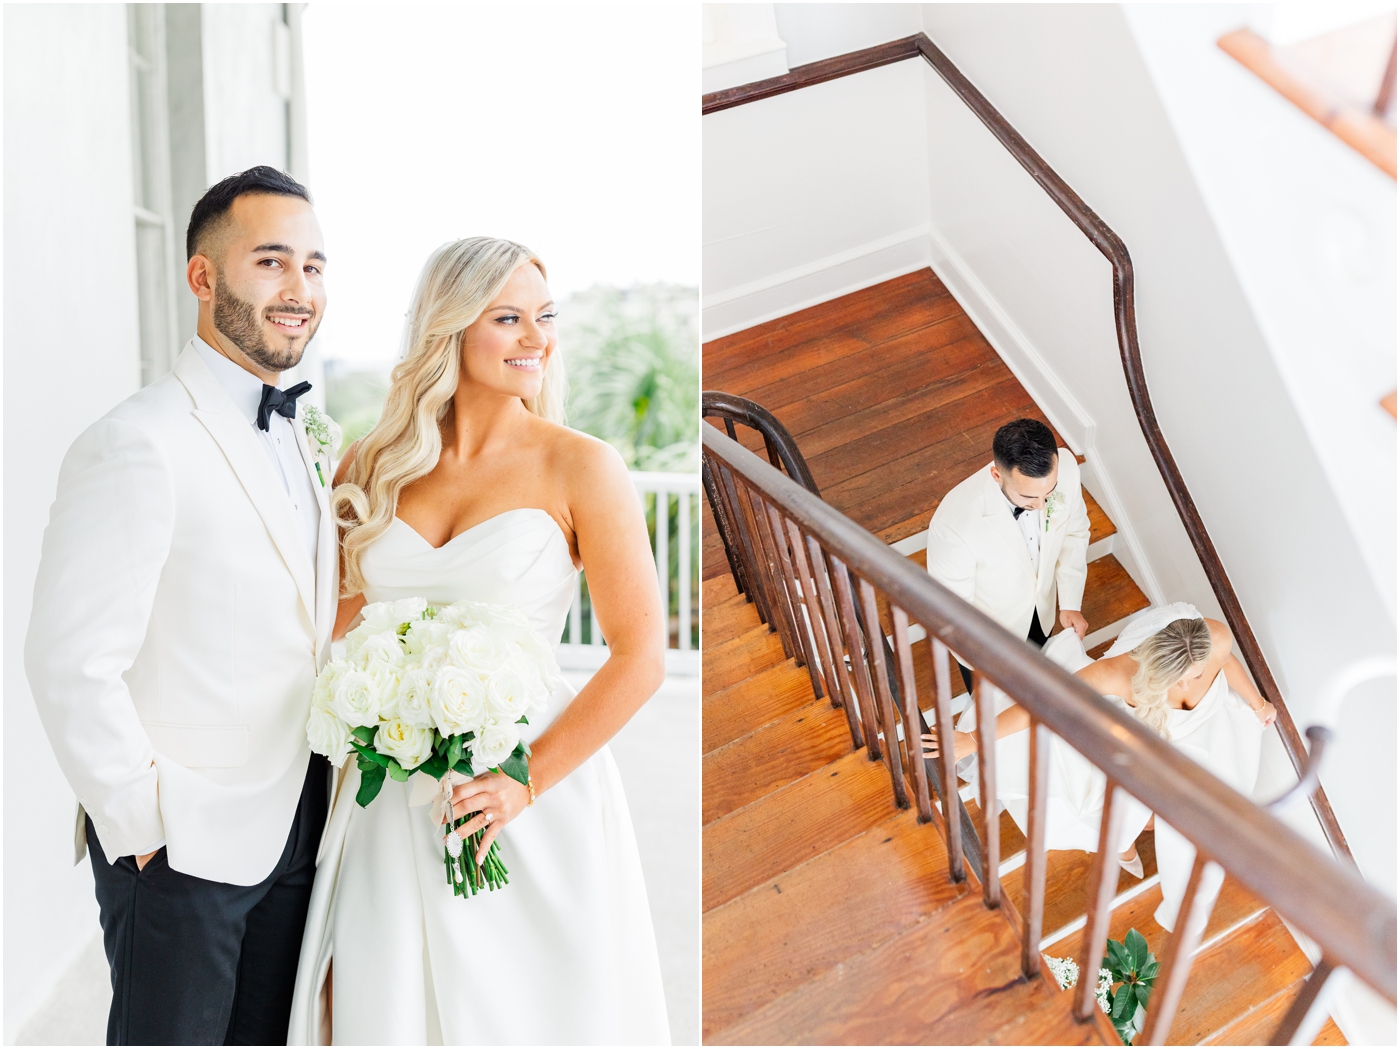 Bride & Groom first look on stairs at the Gadsden House in Charleston